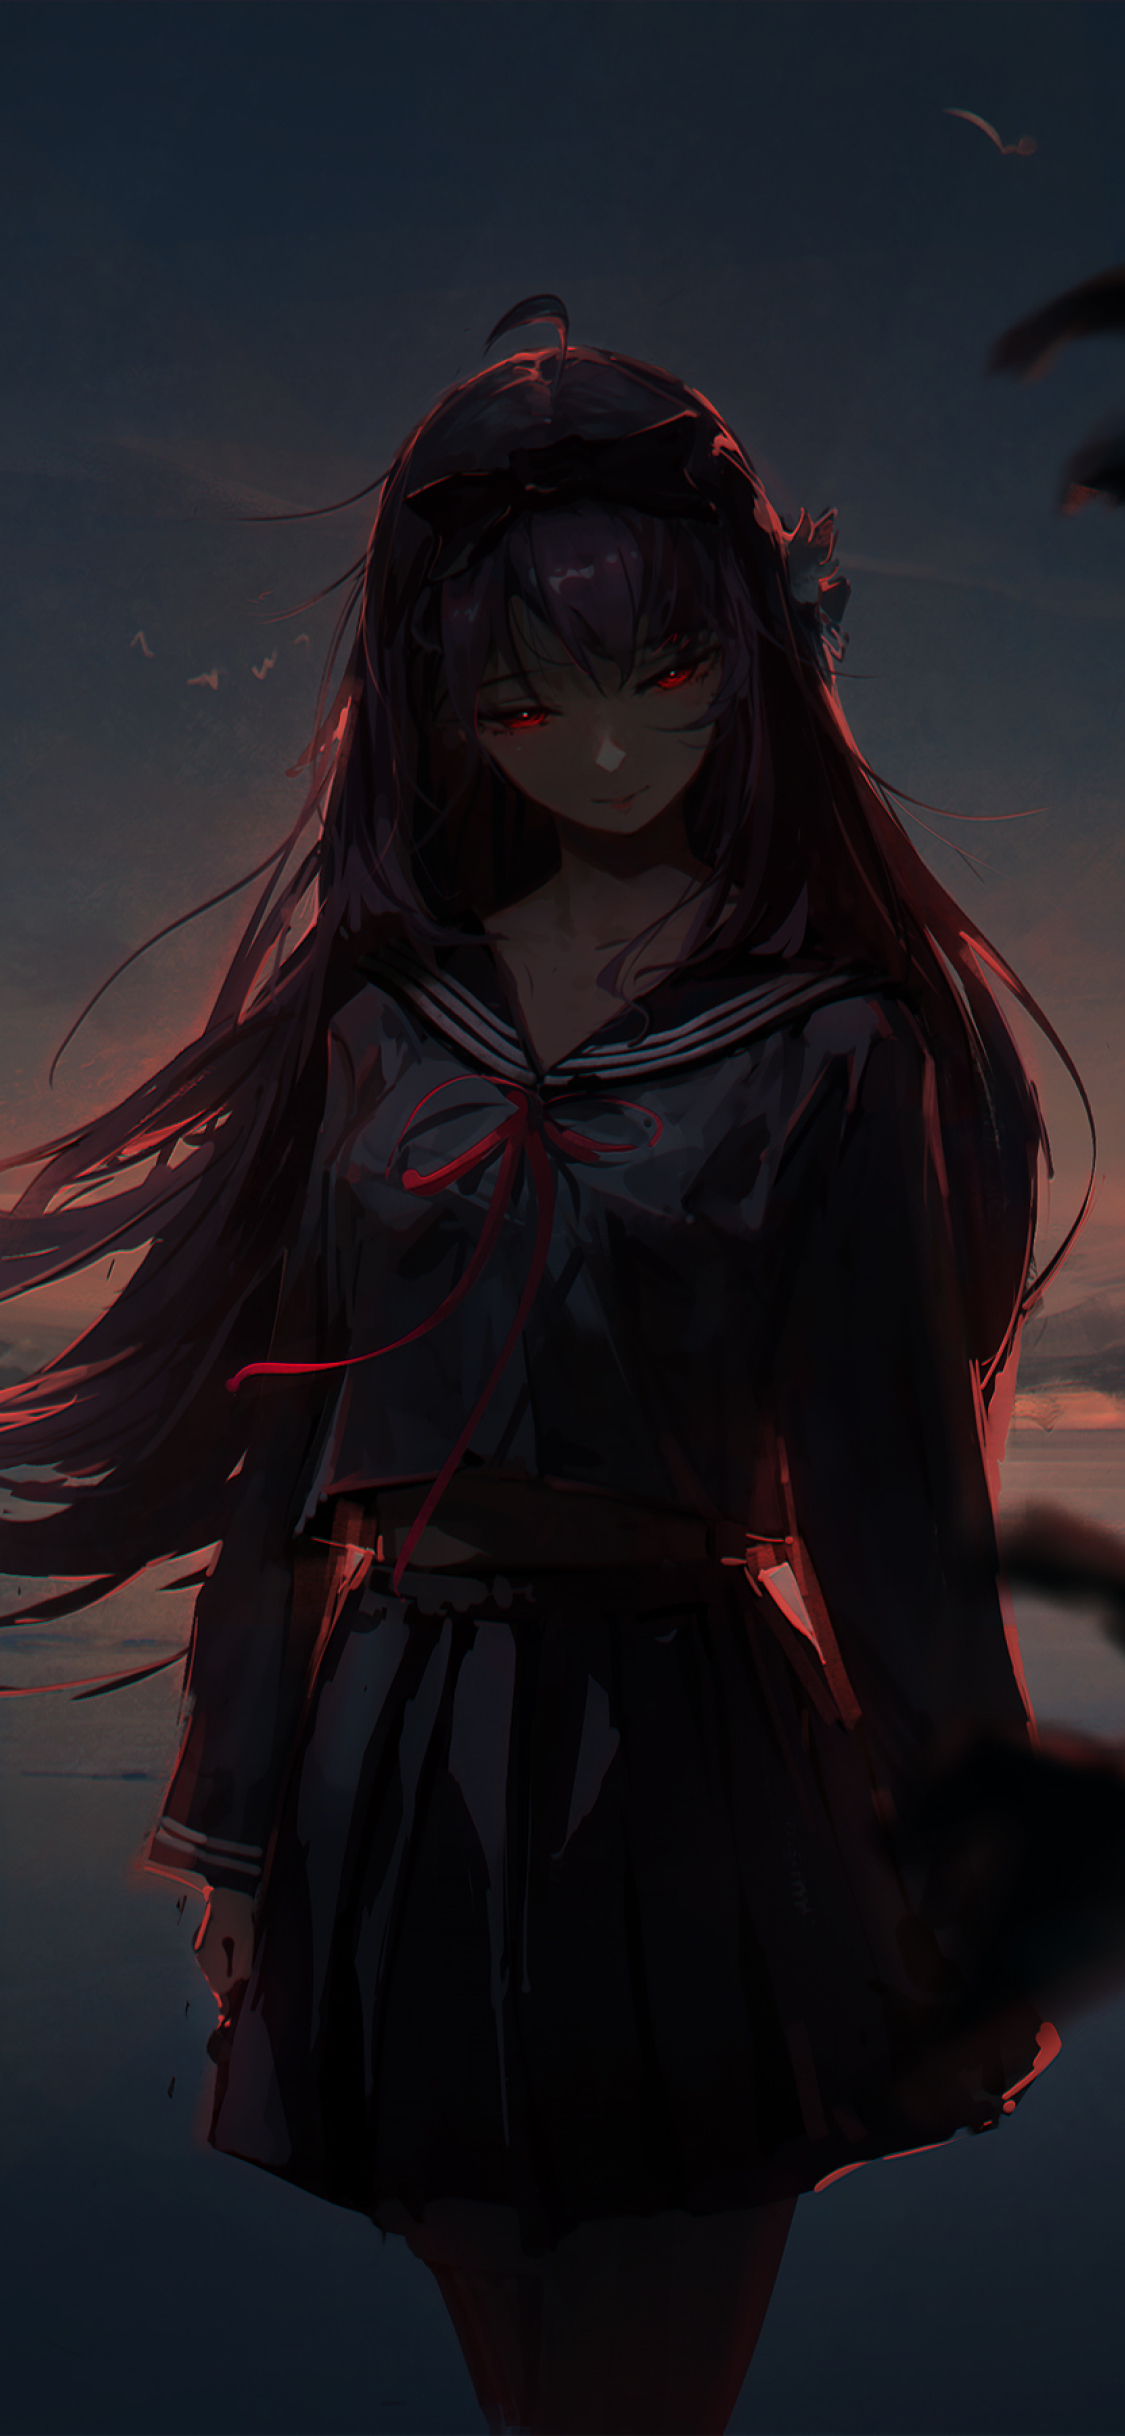 Download Brightly-Colored Red Anime Artwork on Iphone 11 Wallpaper |  Wallpapers.com